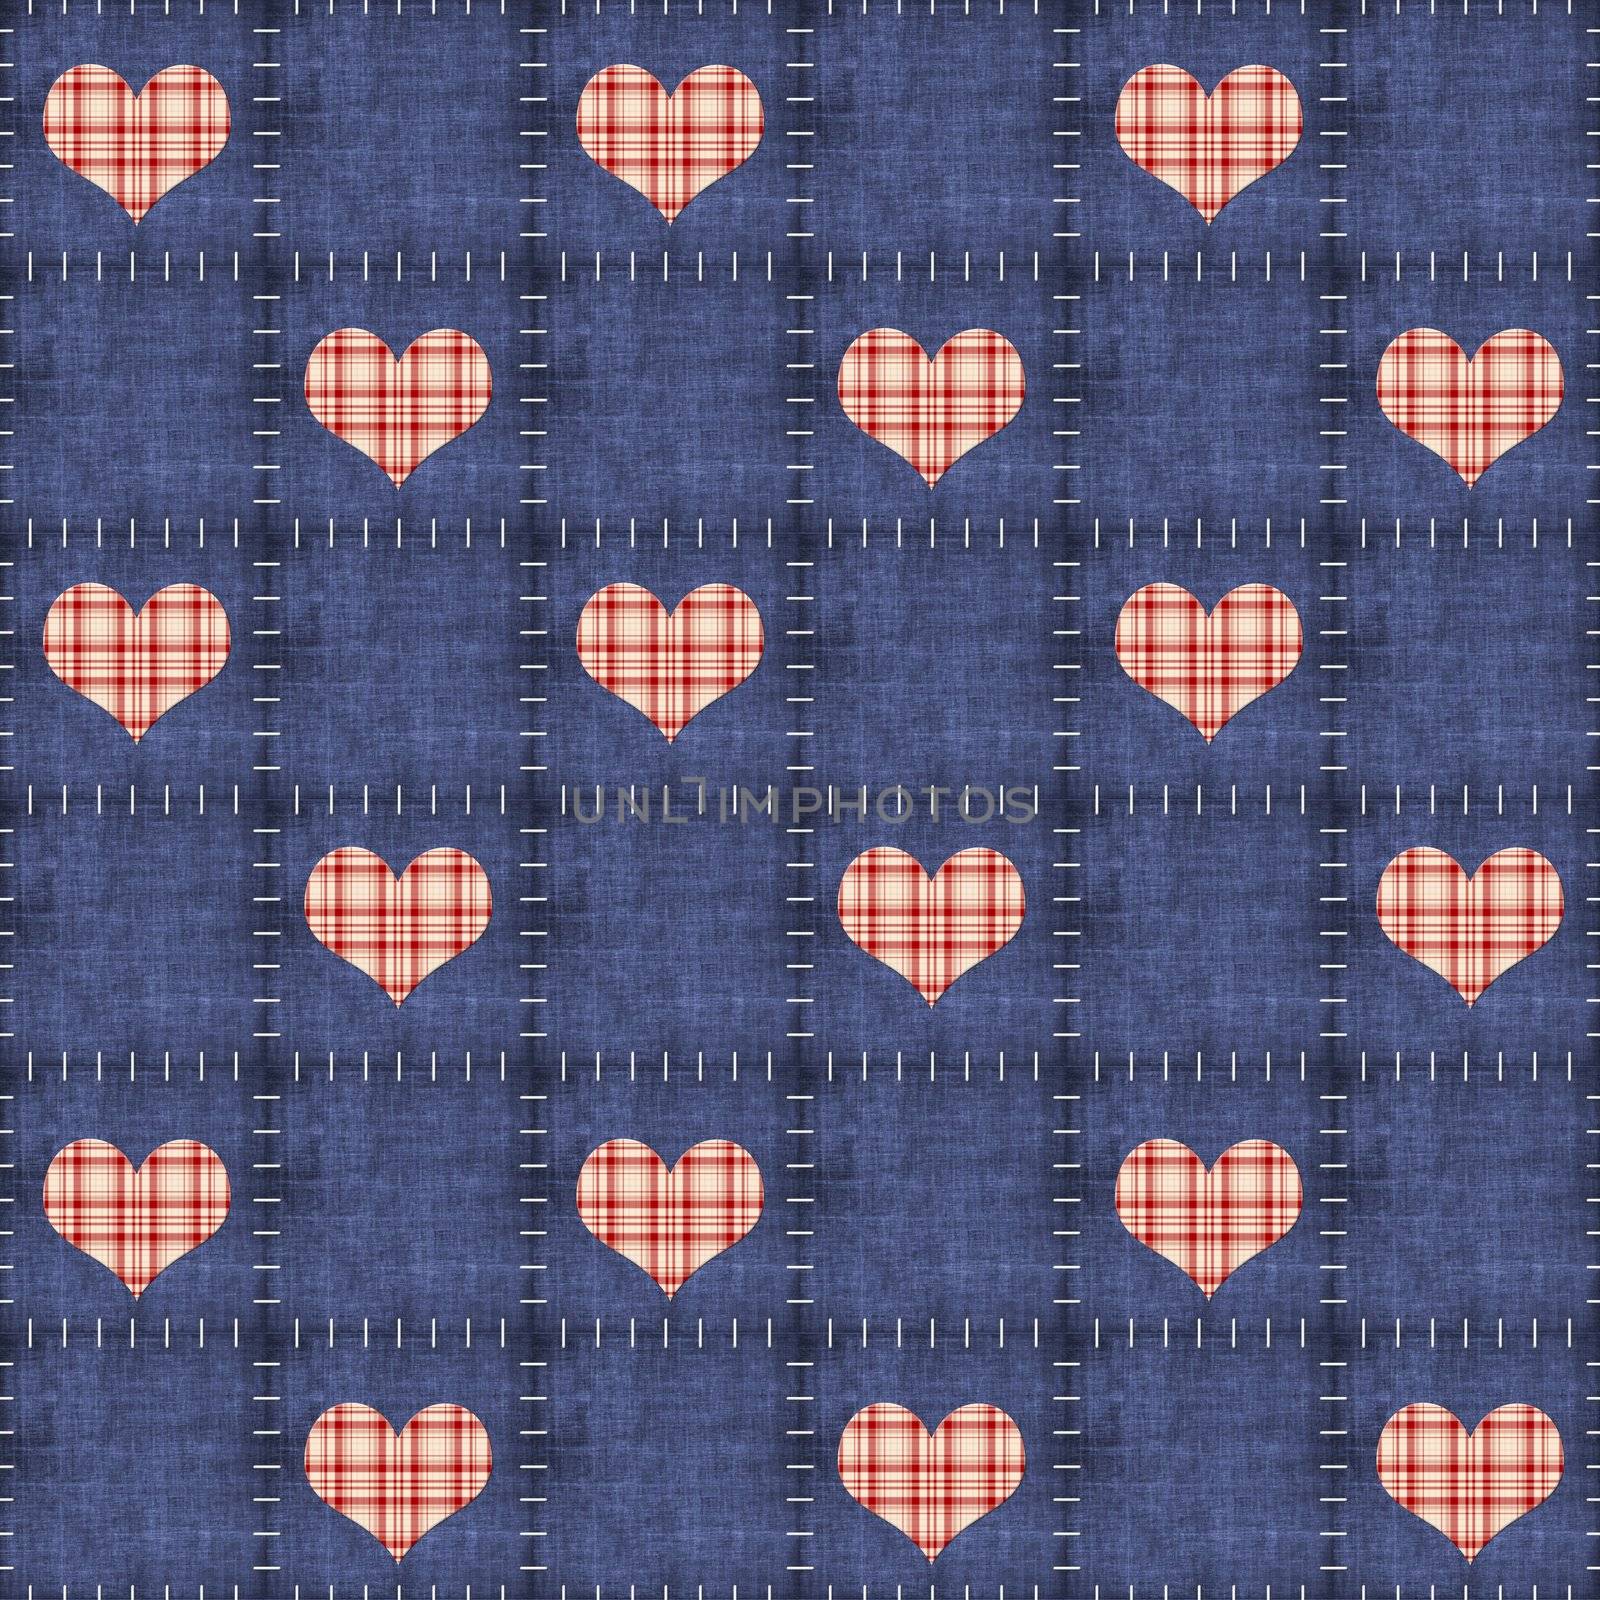 Seamless Denim & Red Plaid Hearts by SongPixels